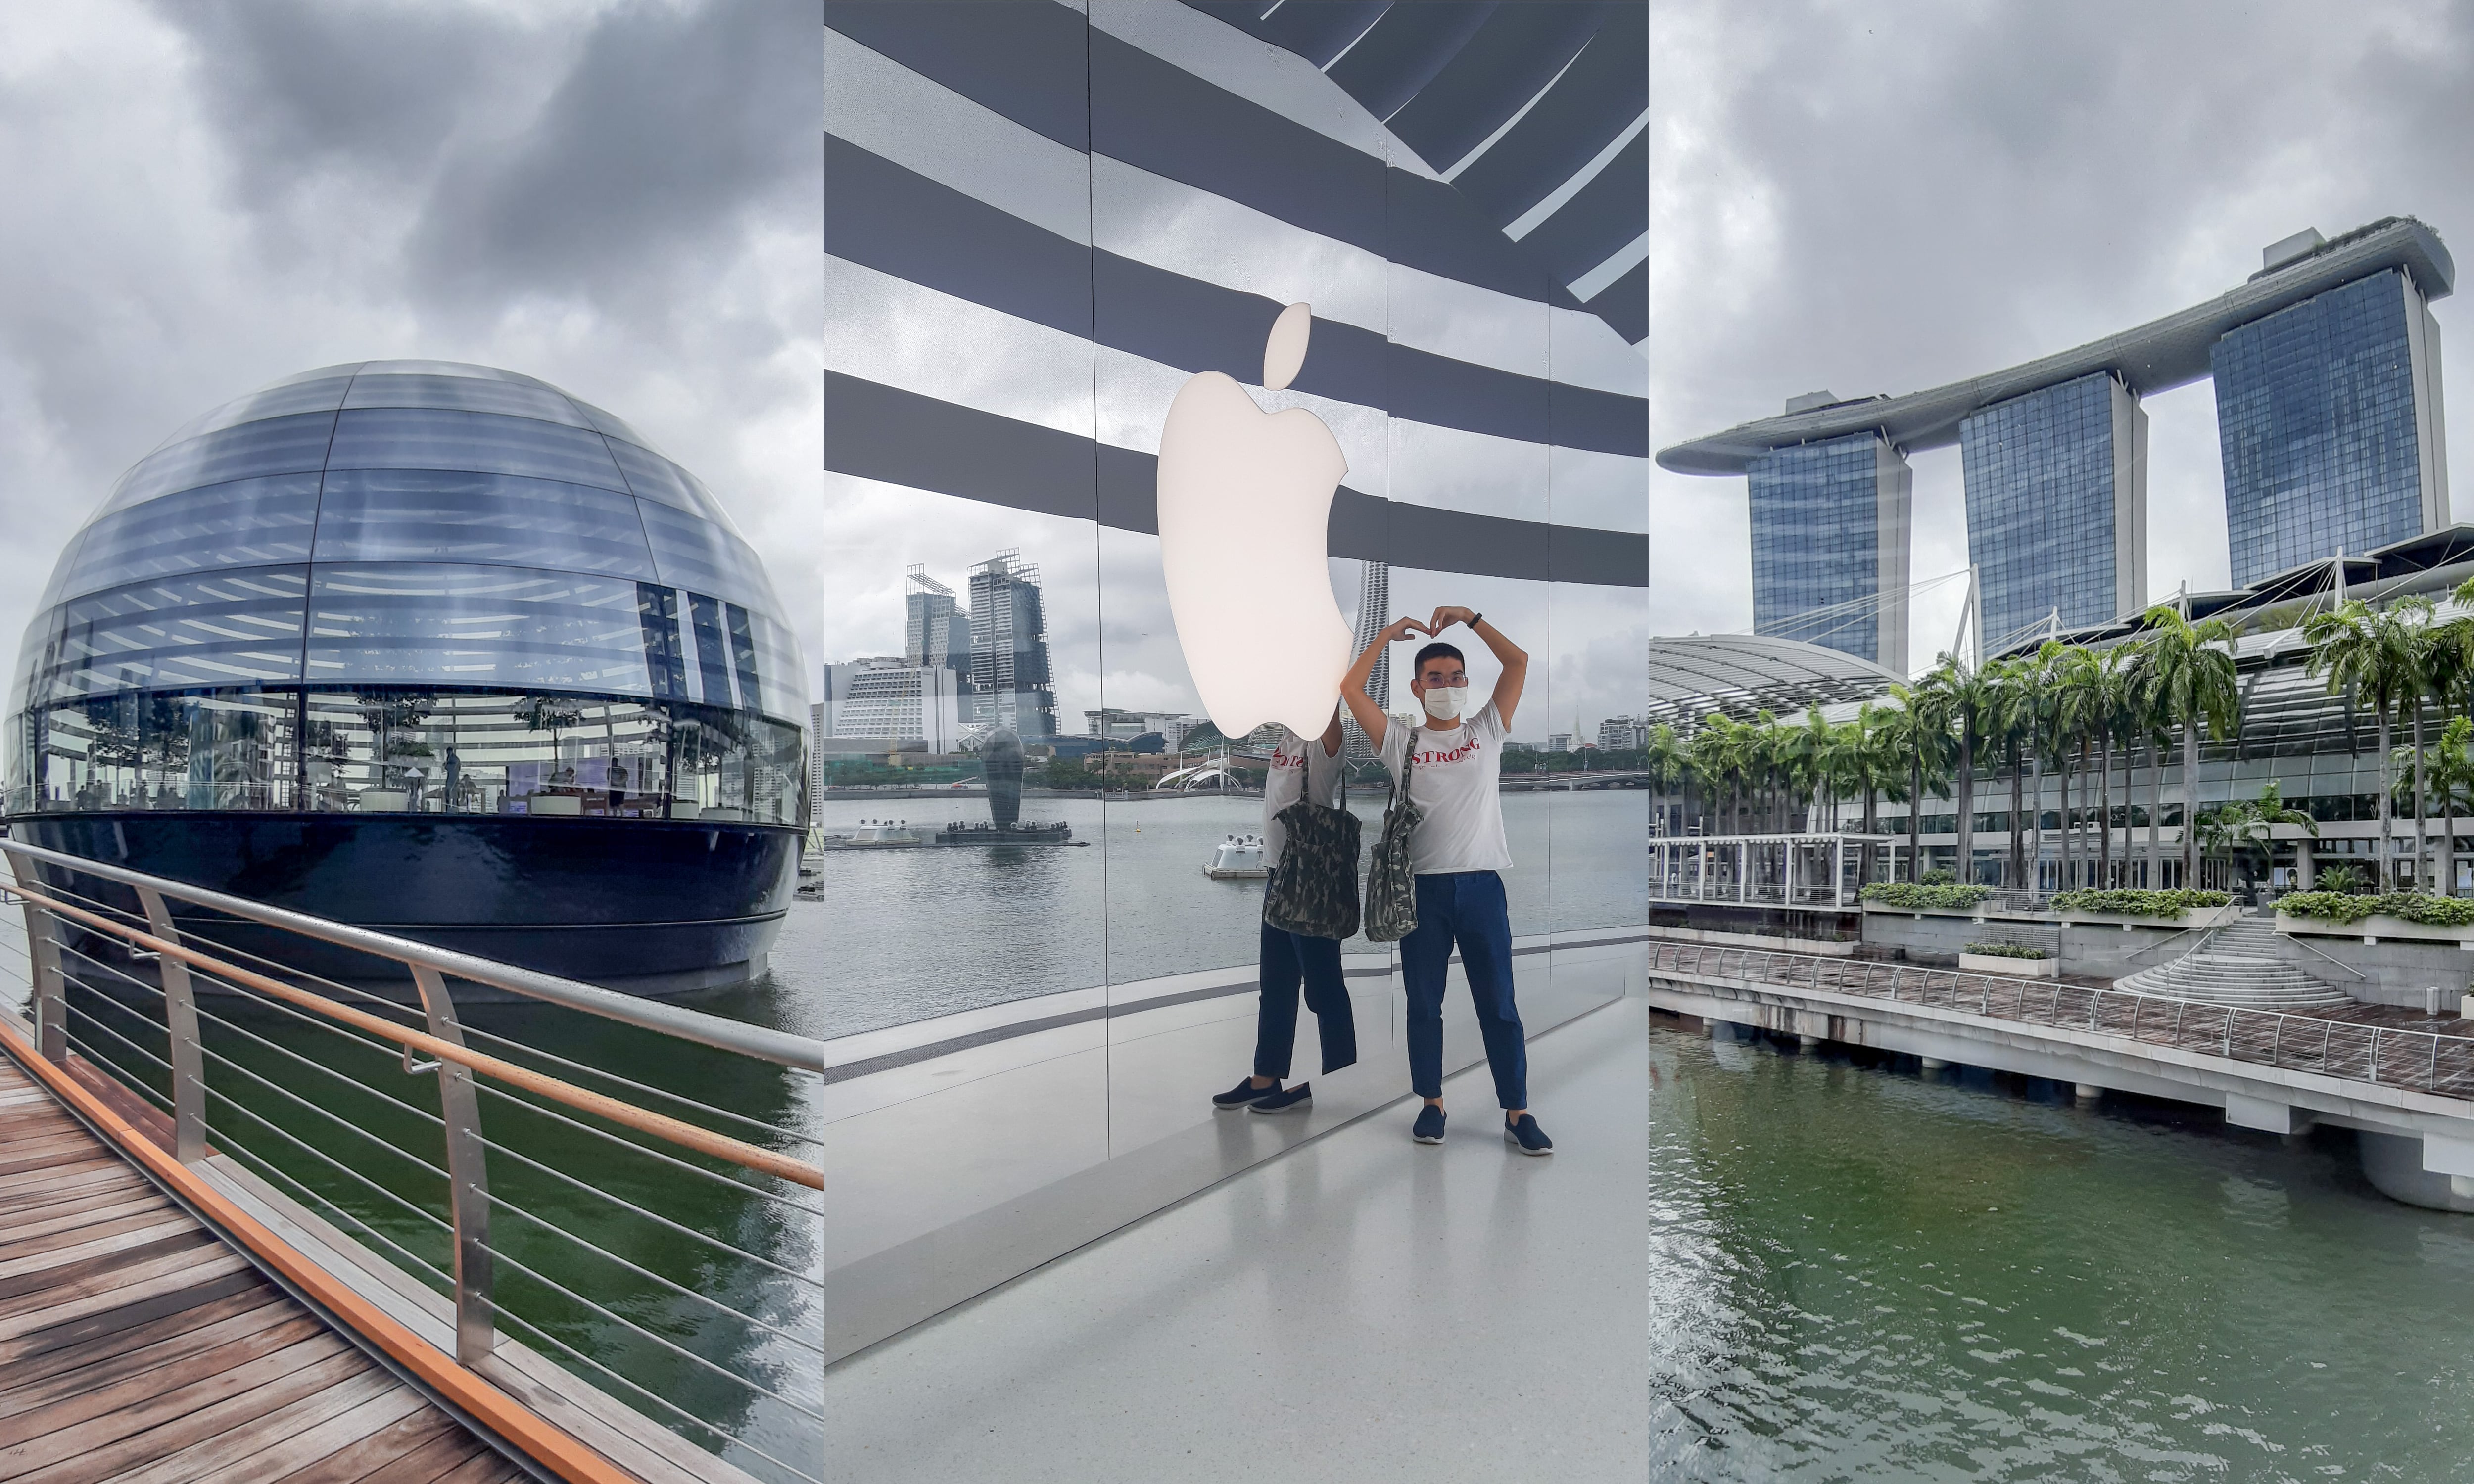 Apple Marina Bay Sands in Singapore unwrapped, opening soon